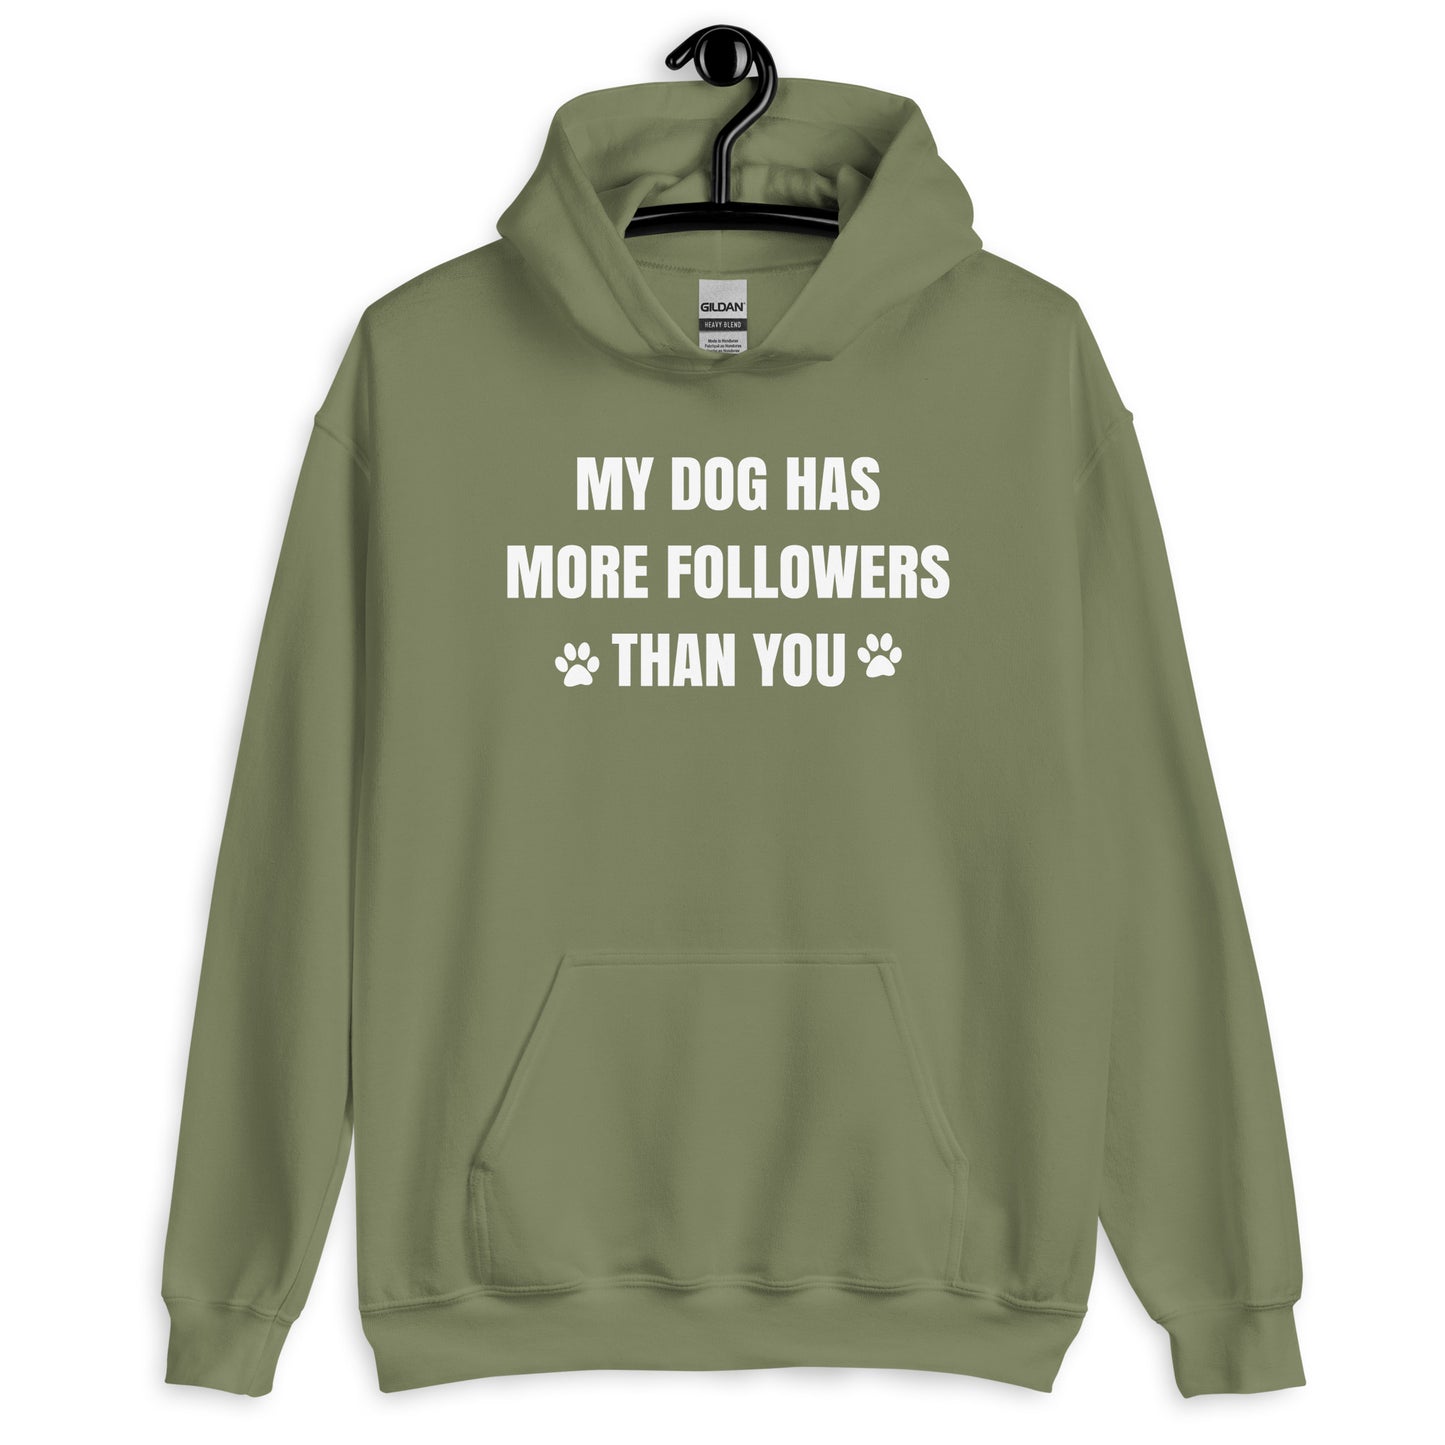 My Dog Has More Followers Than You Unisex Hoodie